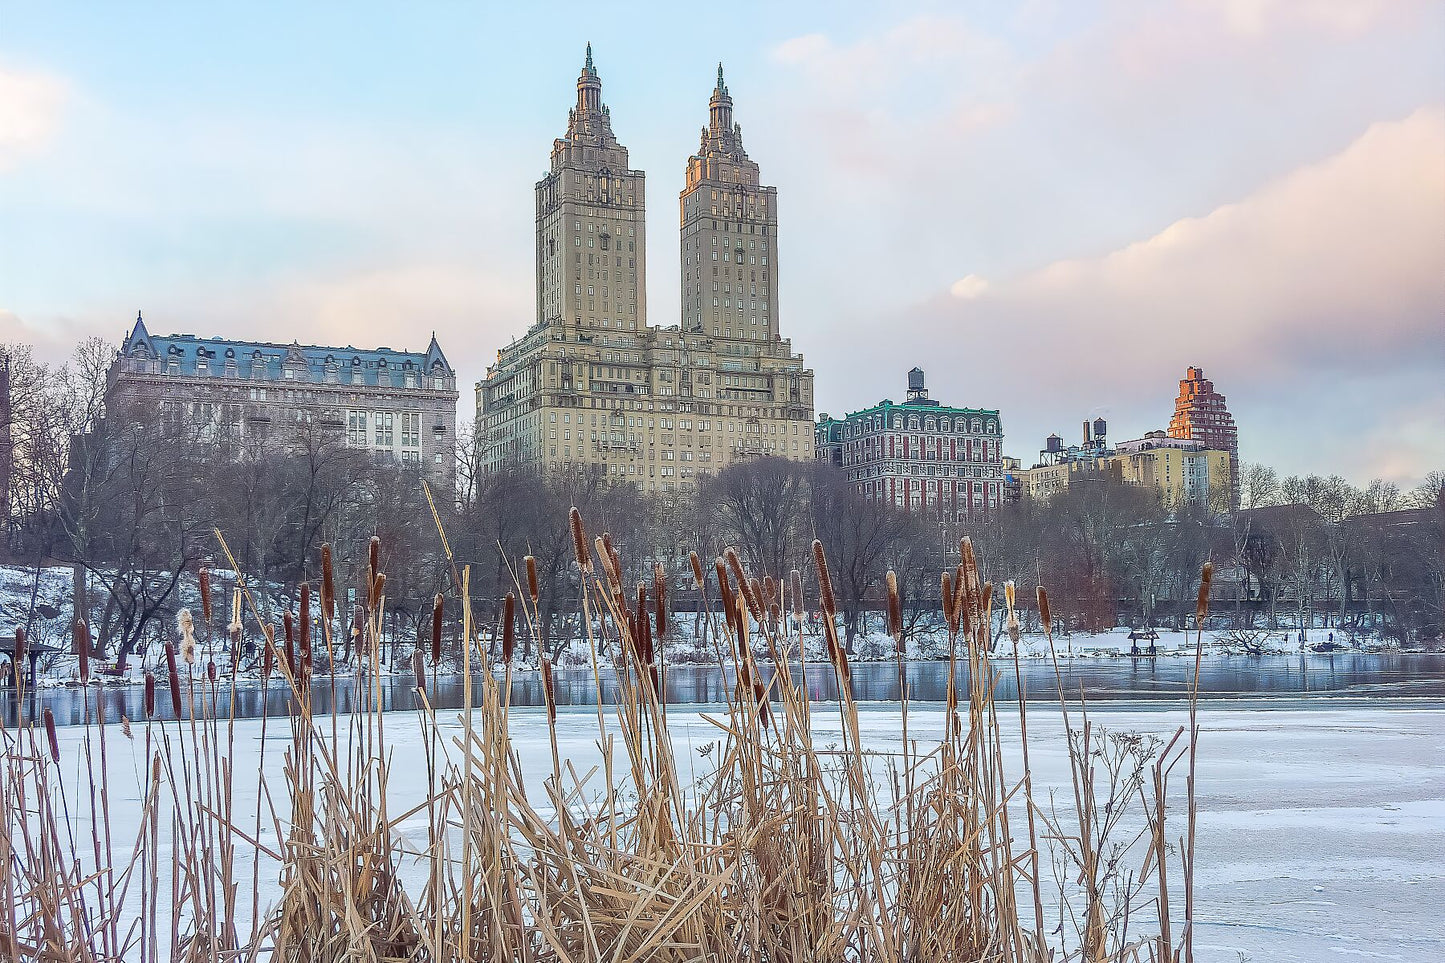 Central Park Lake and Upper West Side in winter